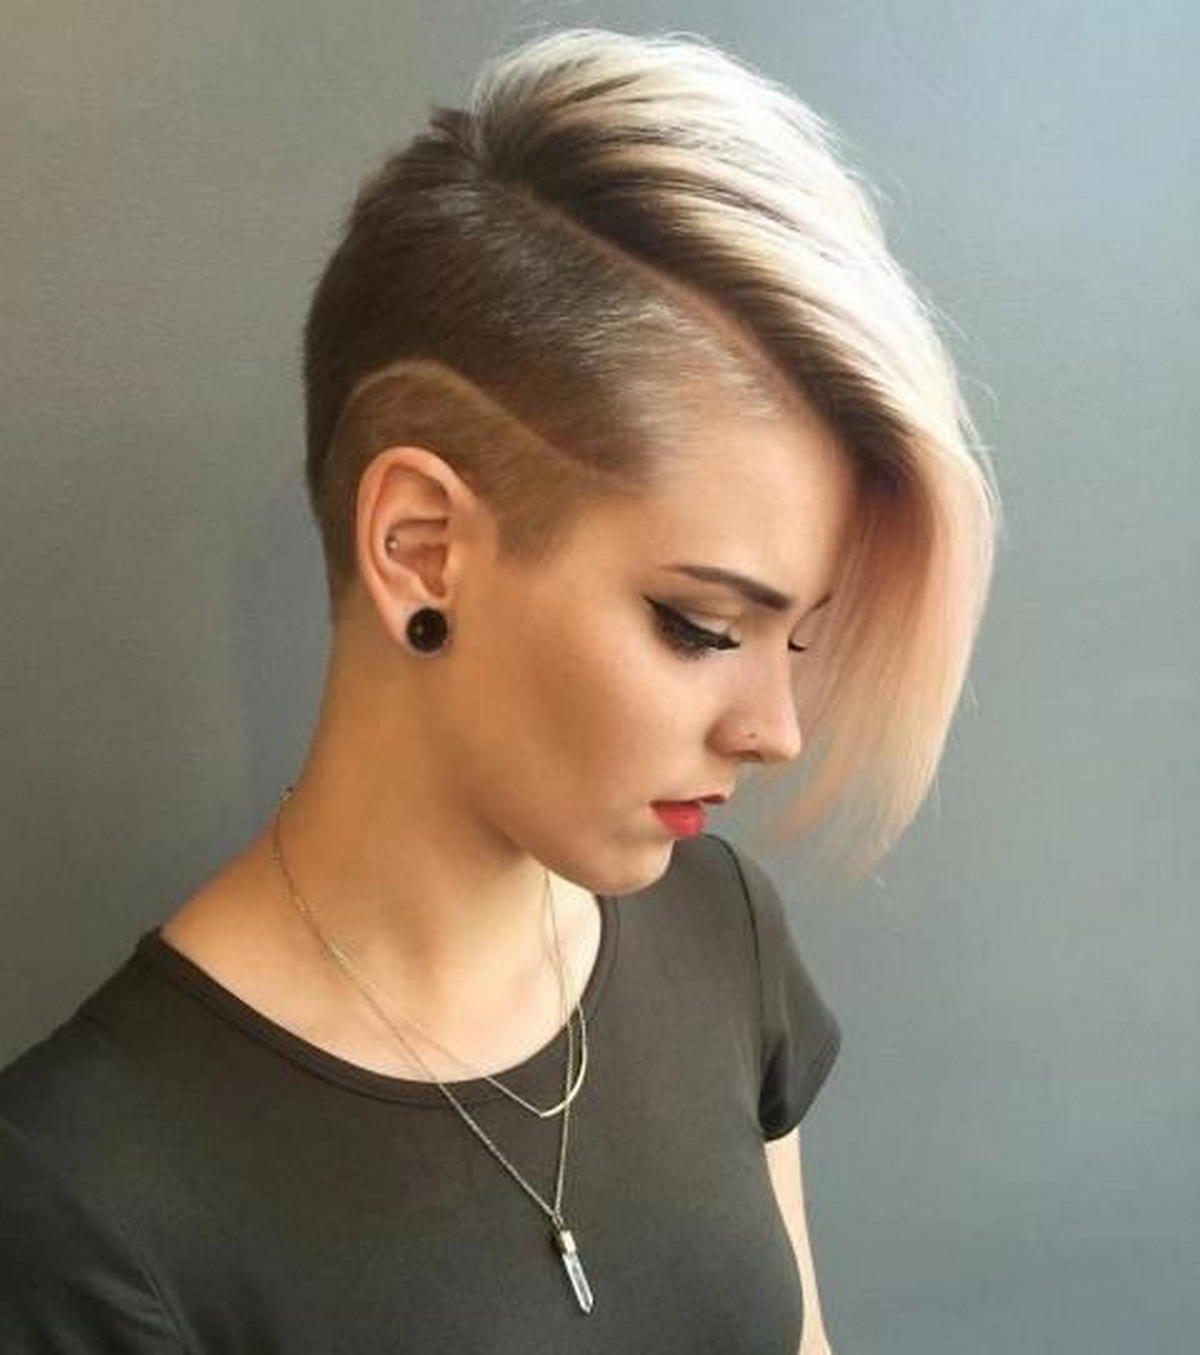 Only the Bold: 15 Shaved Hairstyles for Women - Stalking Style